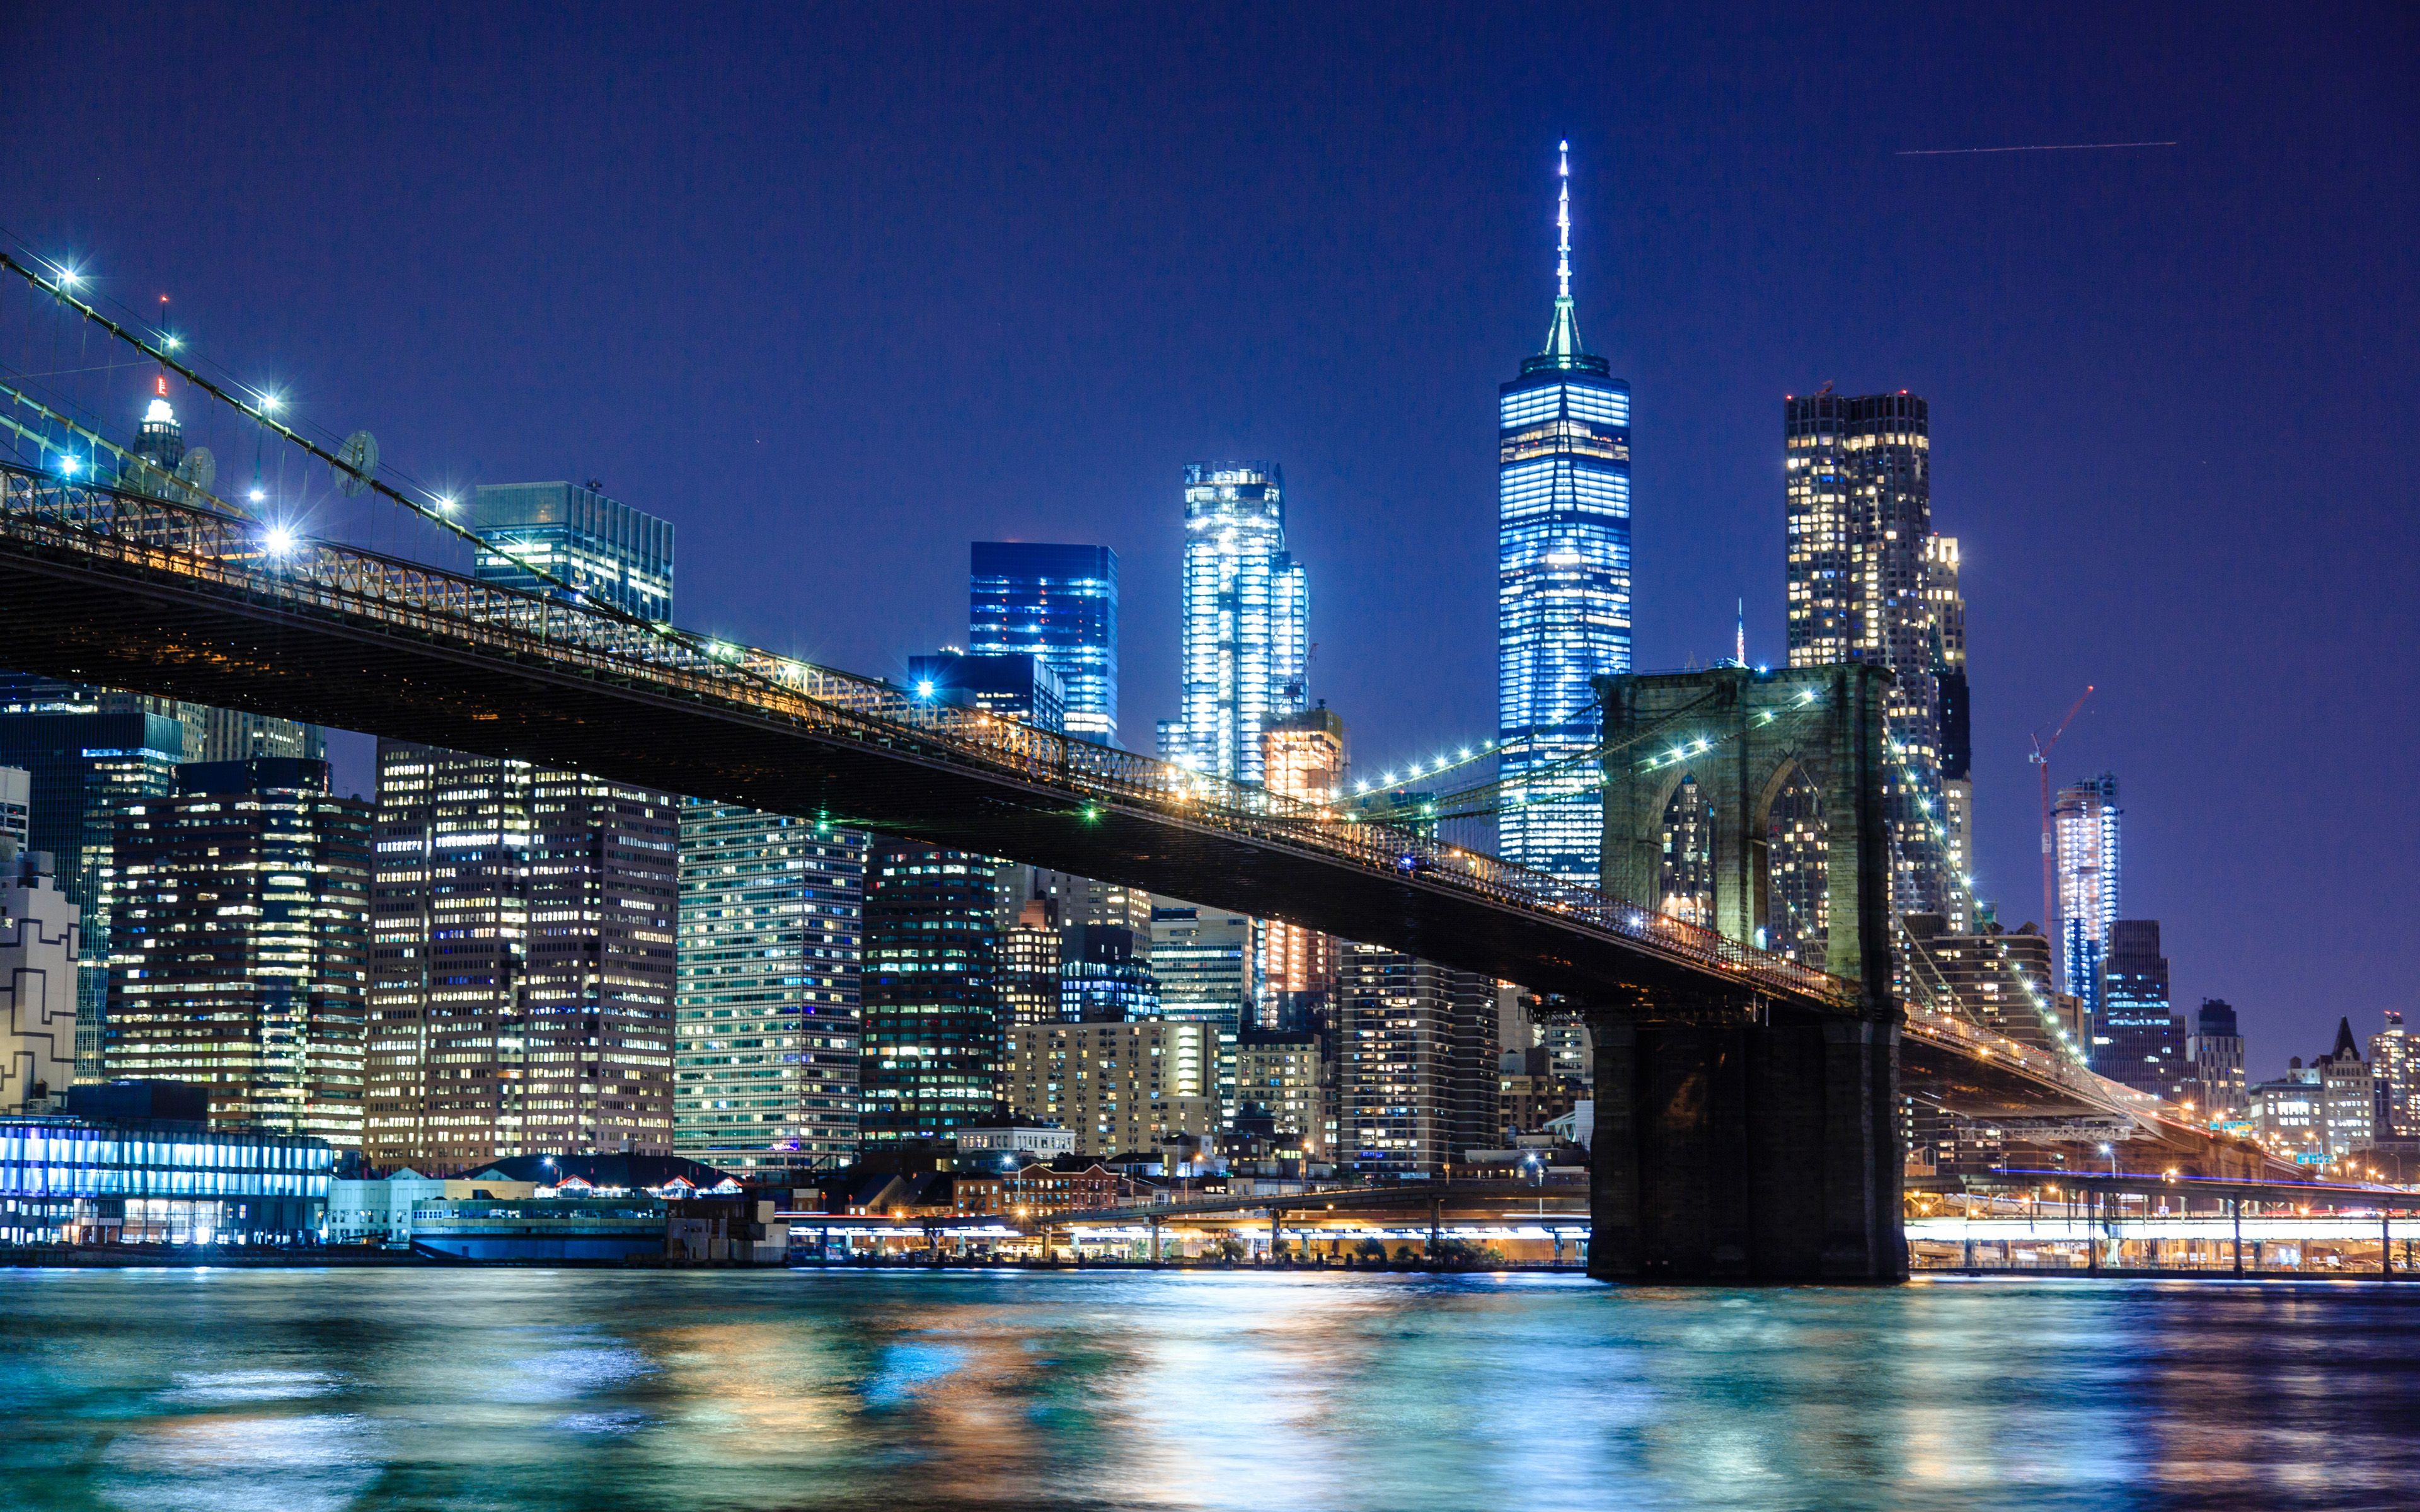 Download wallpaper 4k, Brooklyn Bridge, Empire State Building, nightscapes, New York, USA, american cities, Brooklyn Bridge at night, New York City, NYC, Cities of New York, America for desktop with resolution 3840x2400